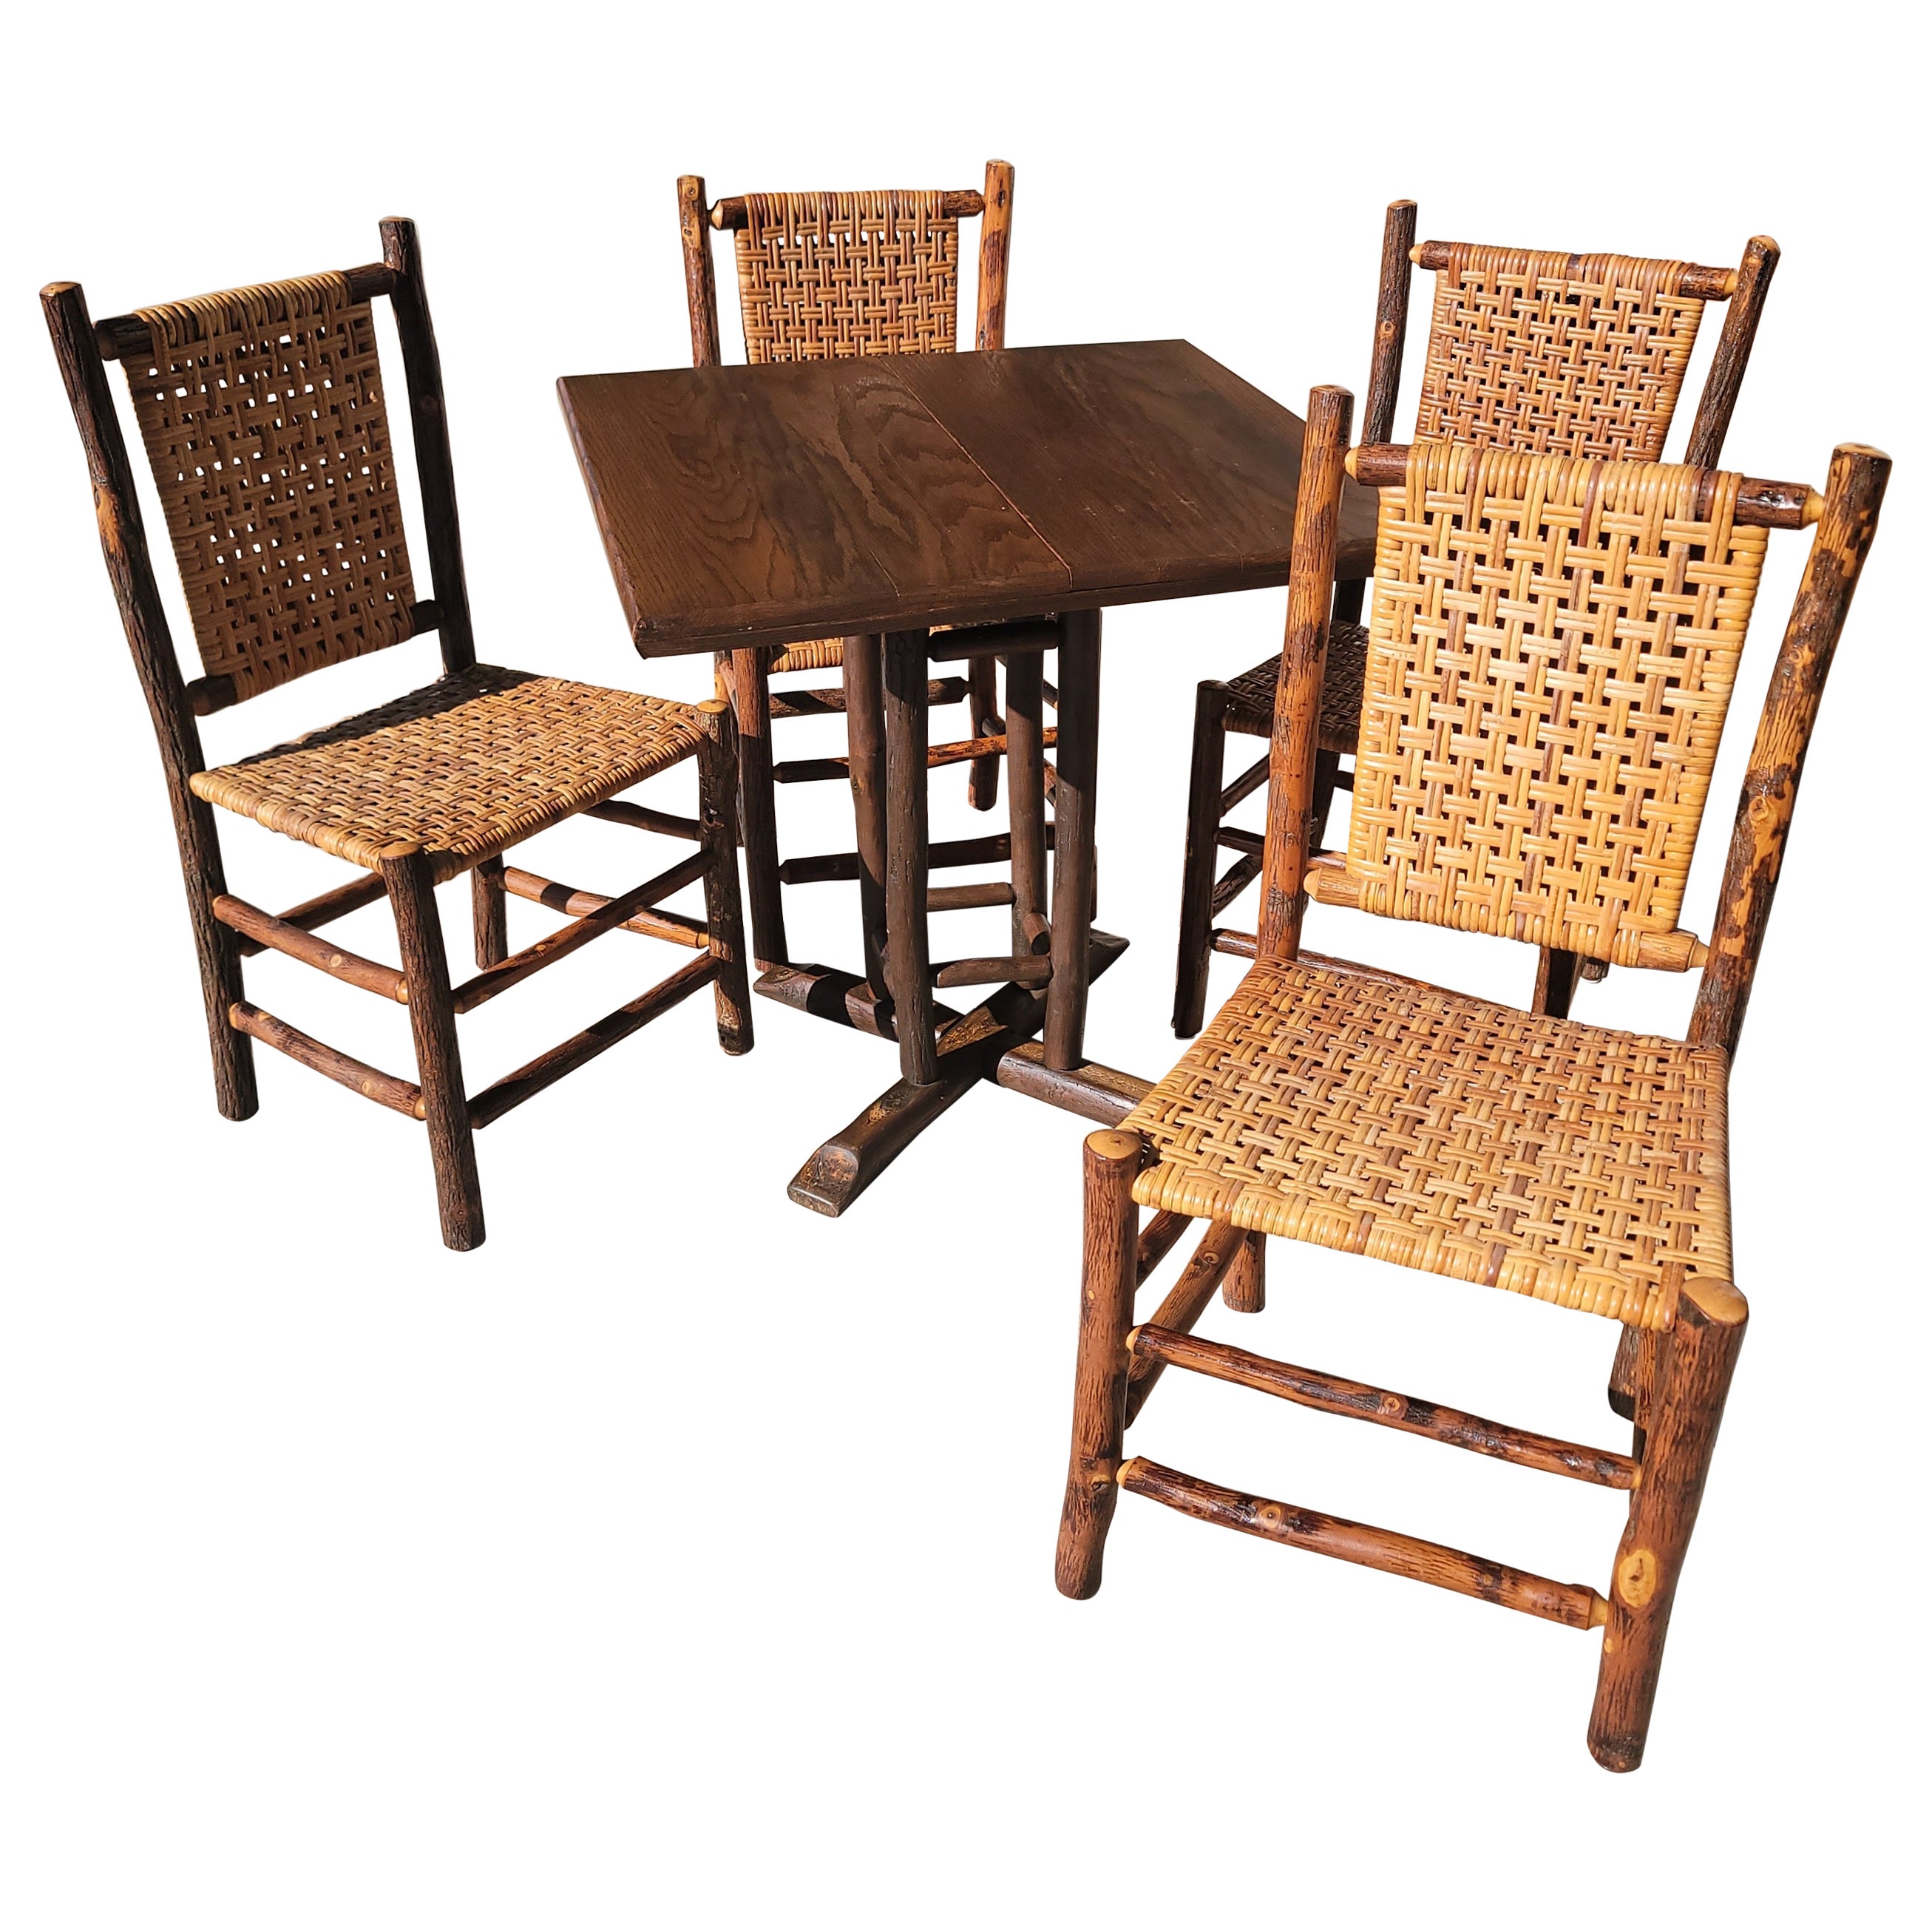 Old Hickory Table and Chairs, Five Piece Collection